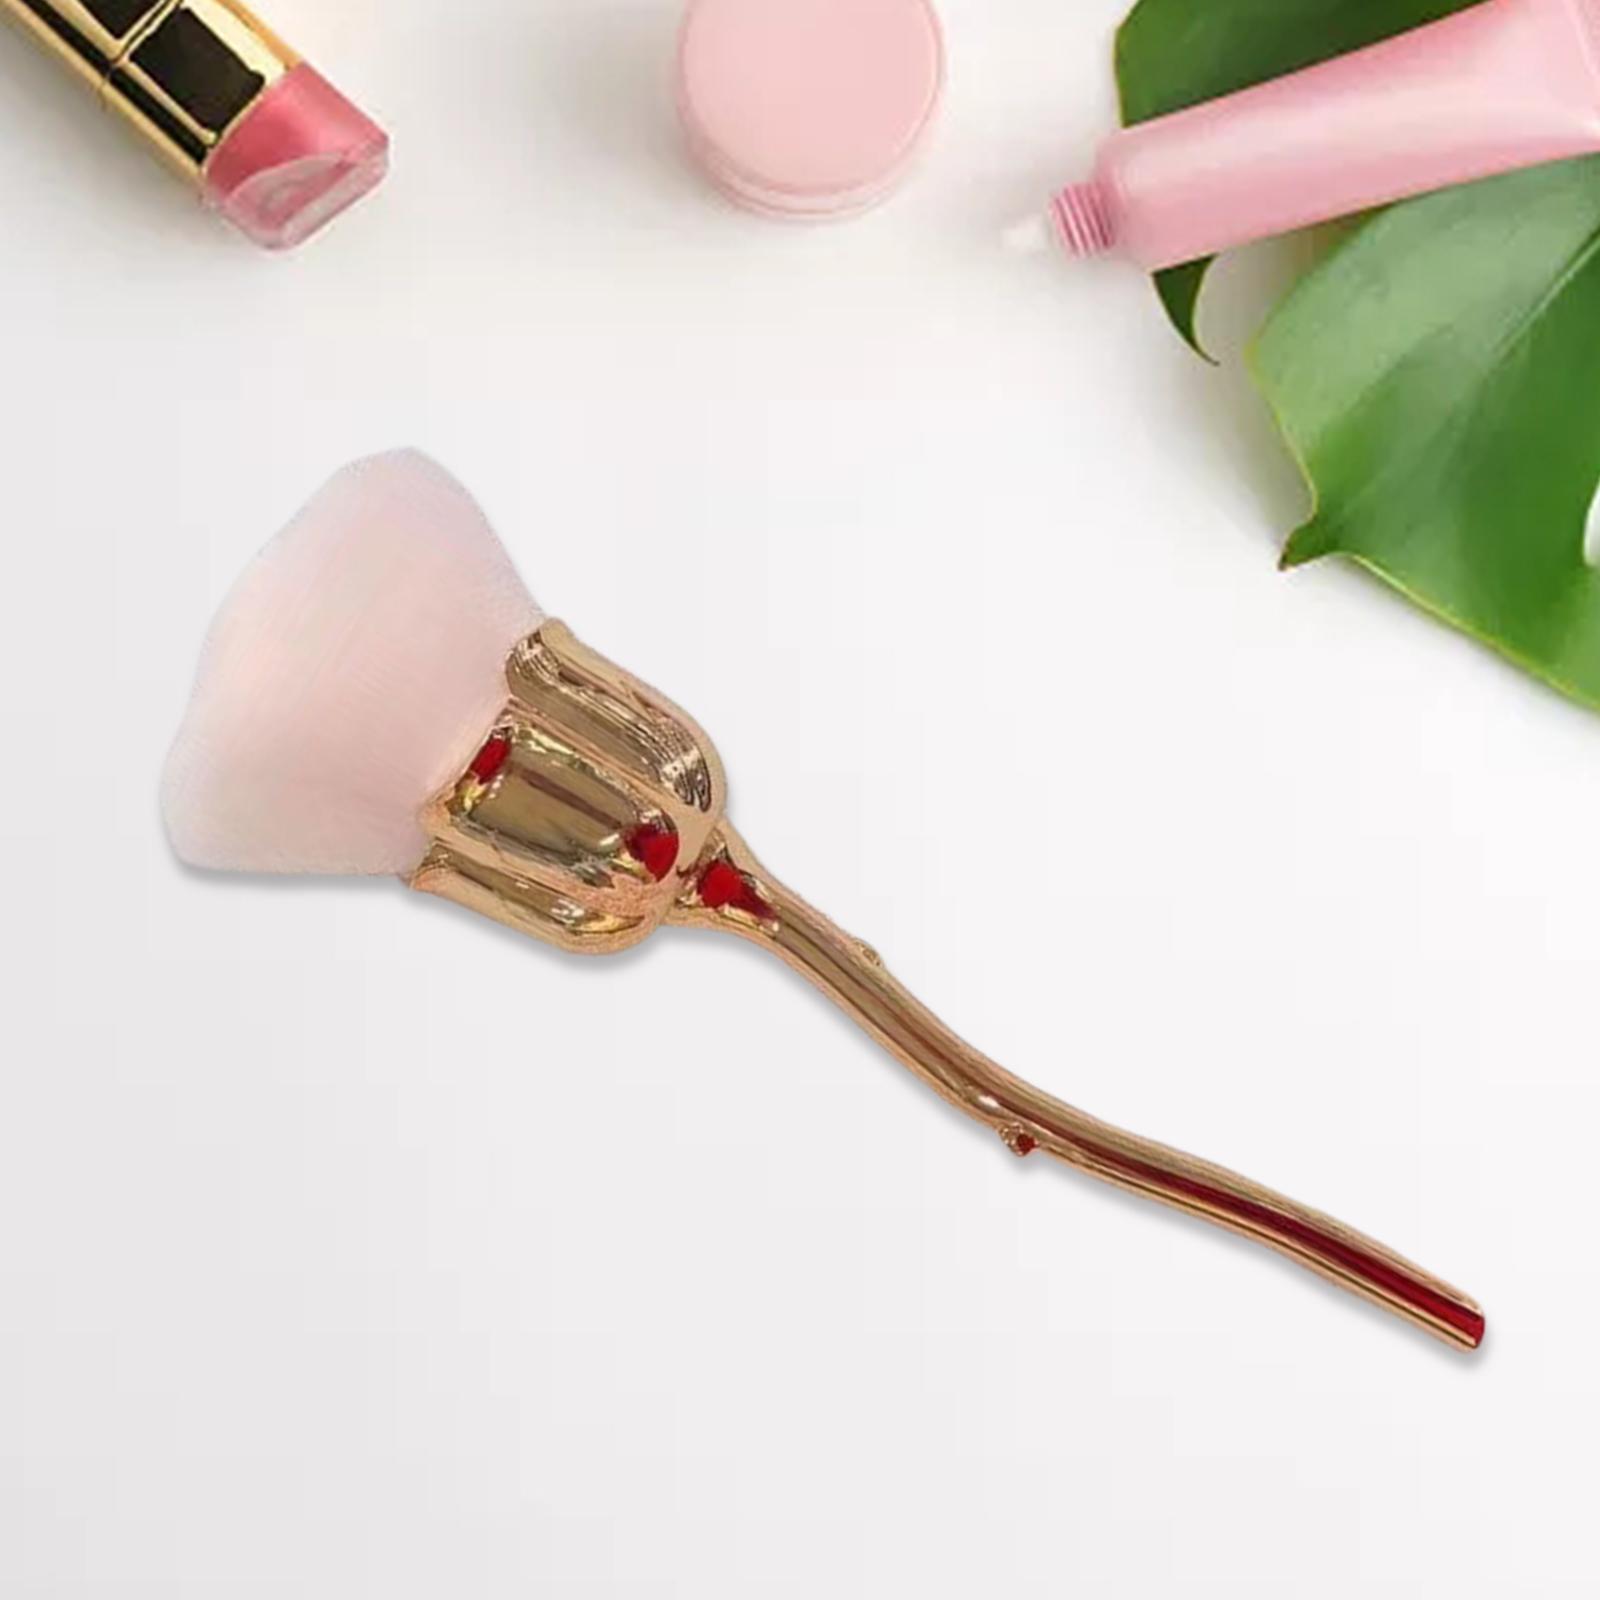 Soft Rose Make Up Brush Large Professional for Face Powder Travel Countertop